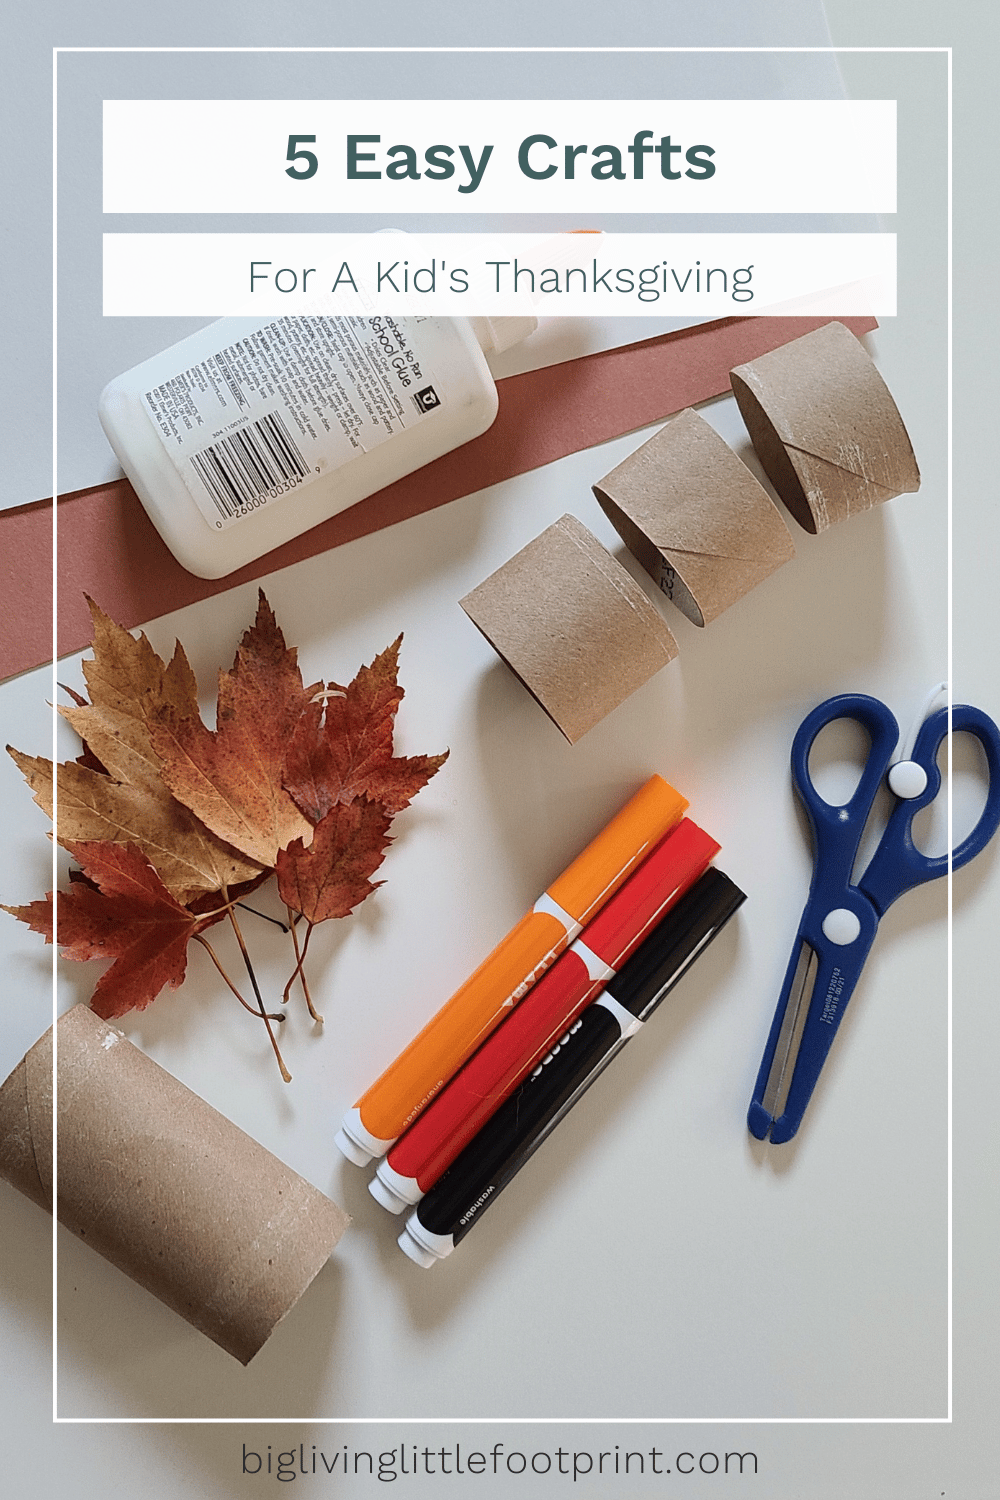 5 Easy Crafts For A Kid’s Thanksgiving